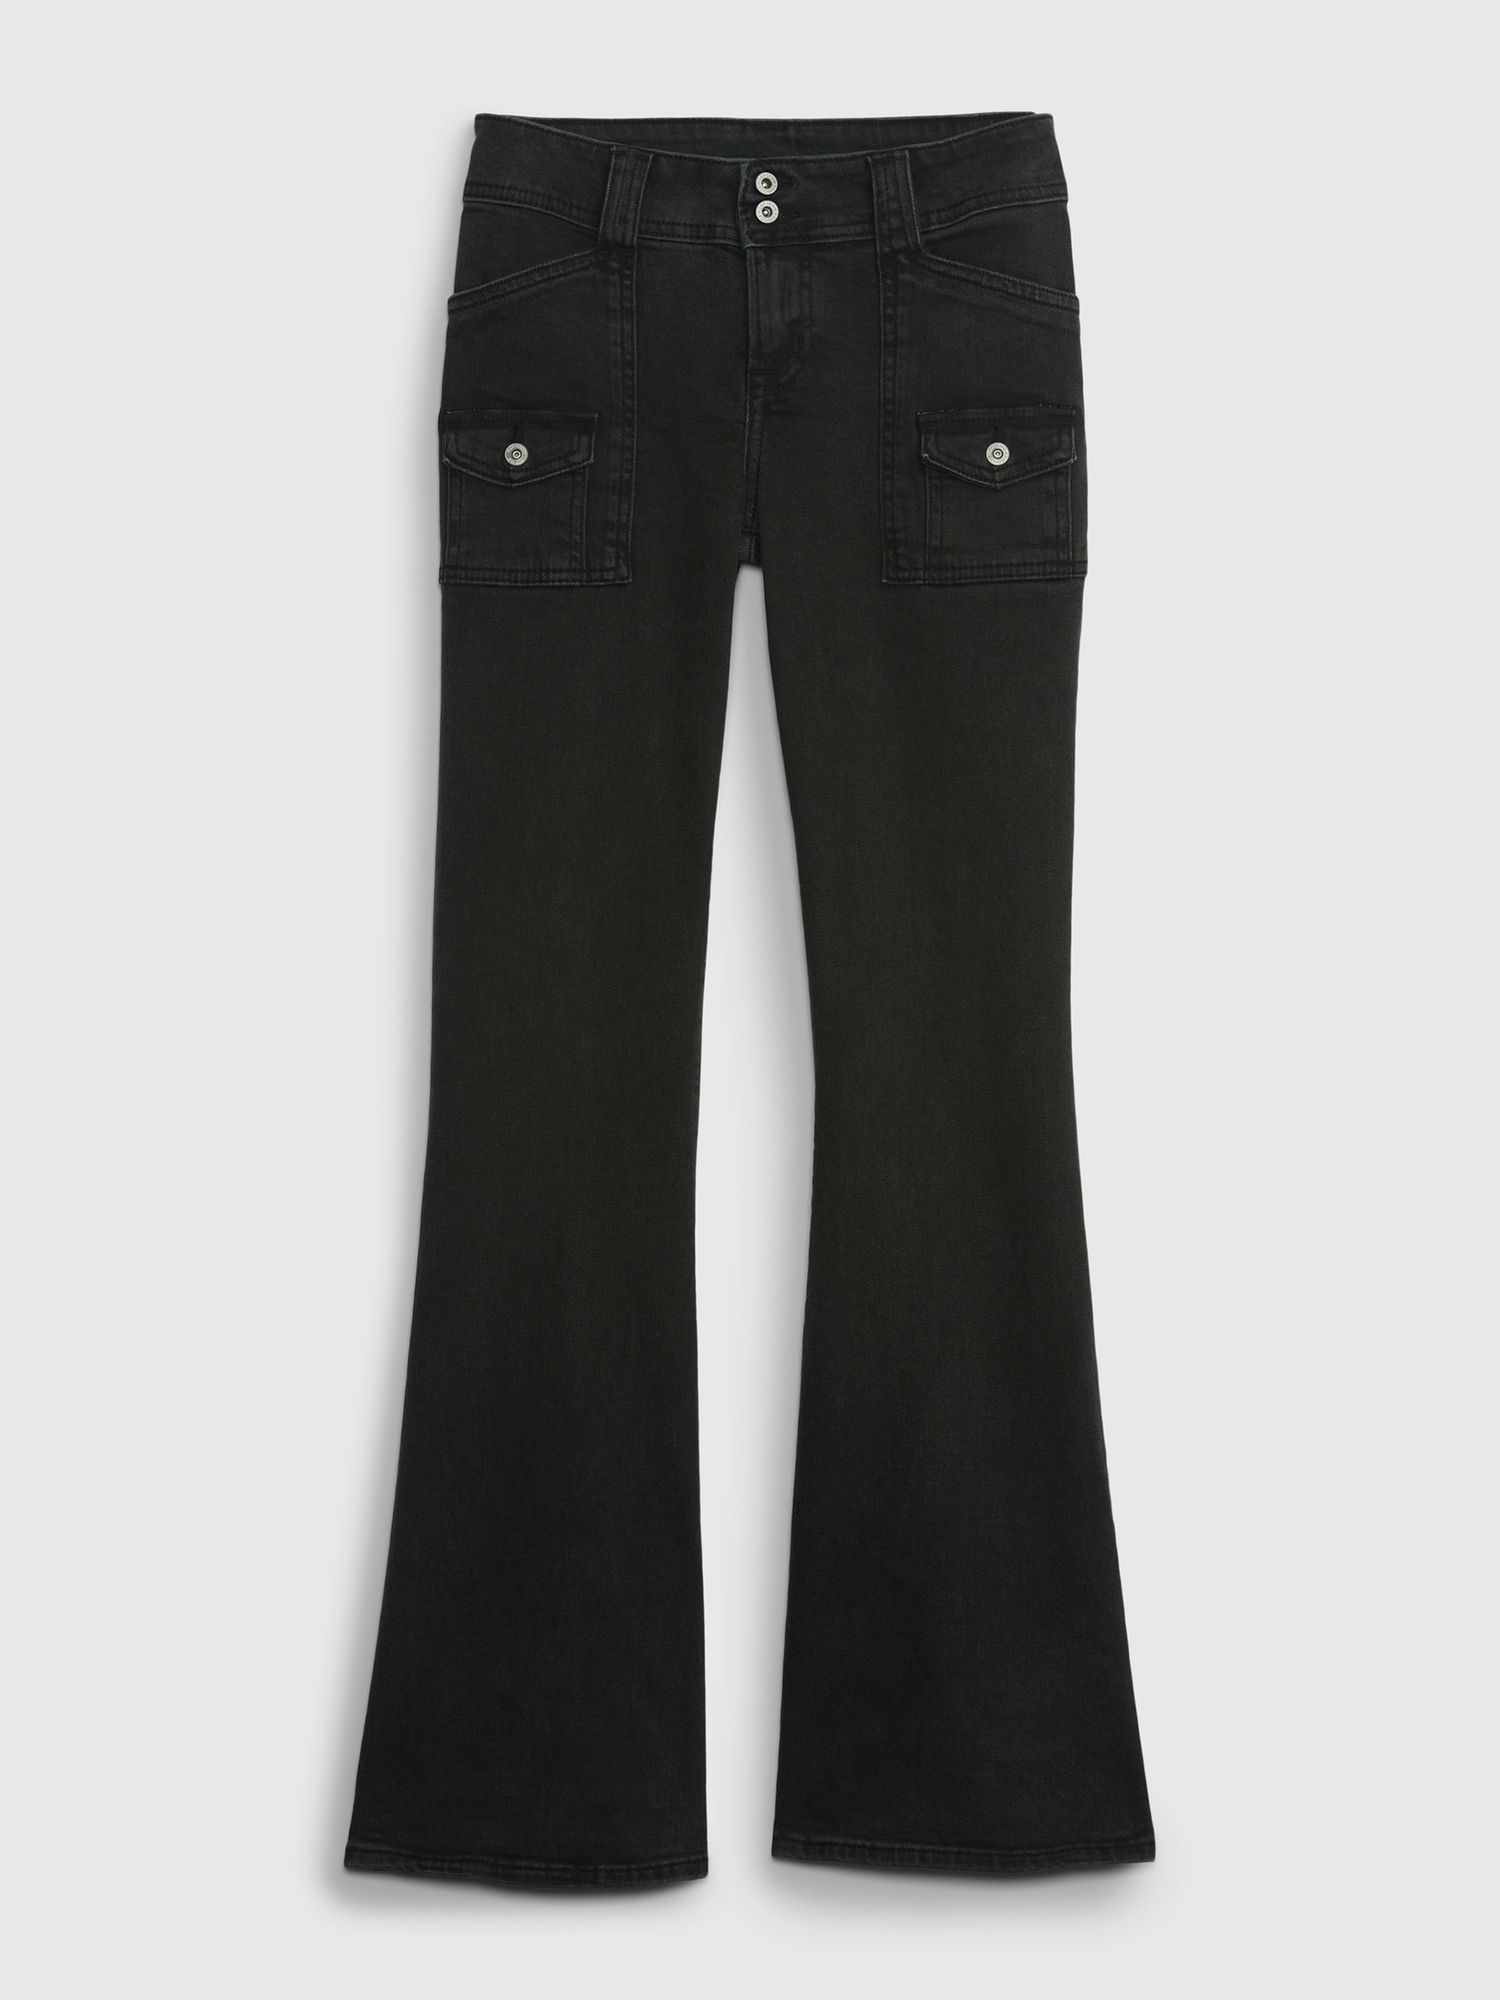 Y2K Black Low Rise Flare Pants (Small) - Imber Vintage